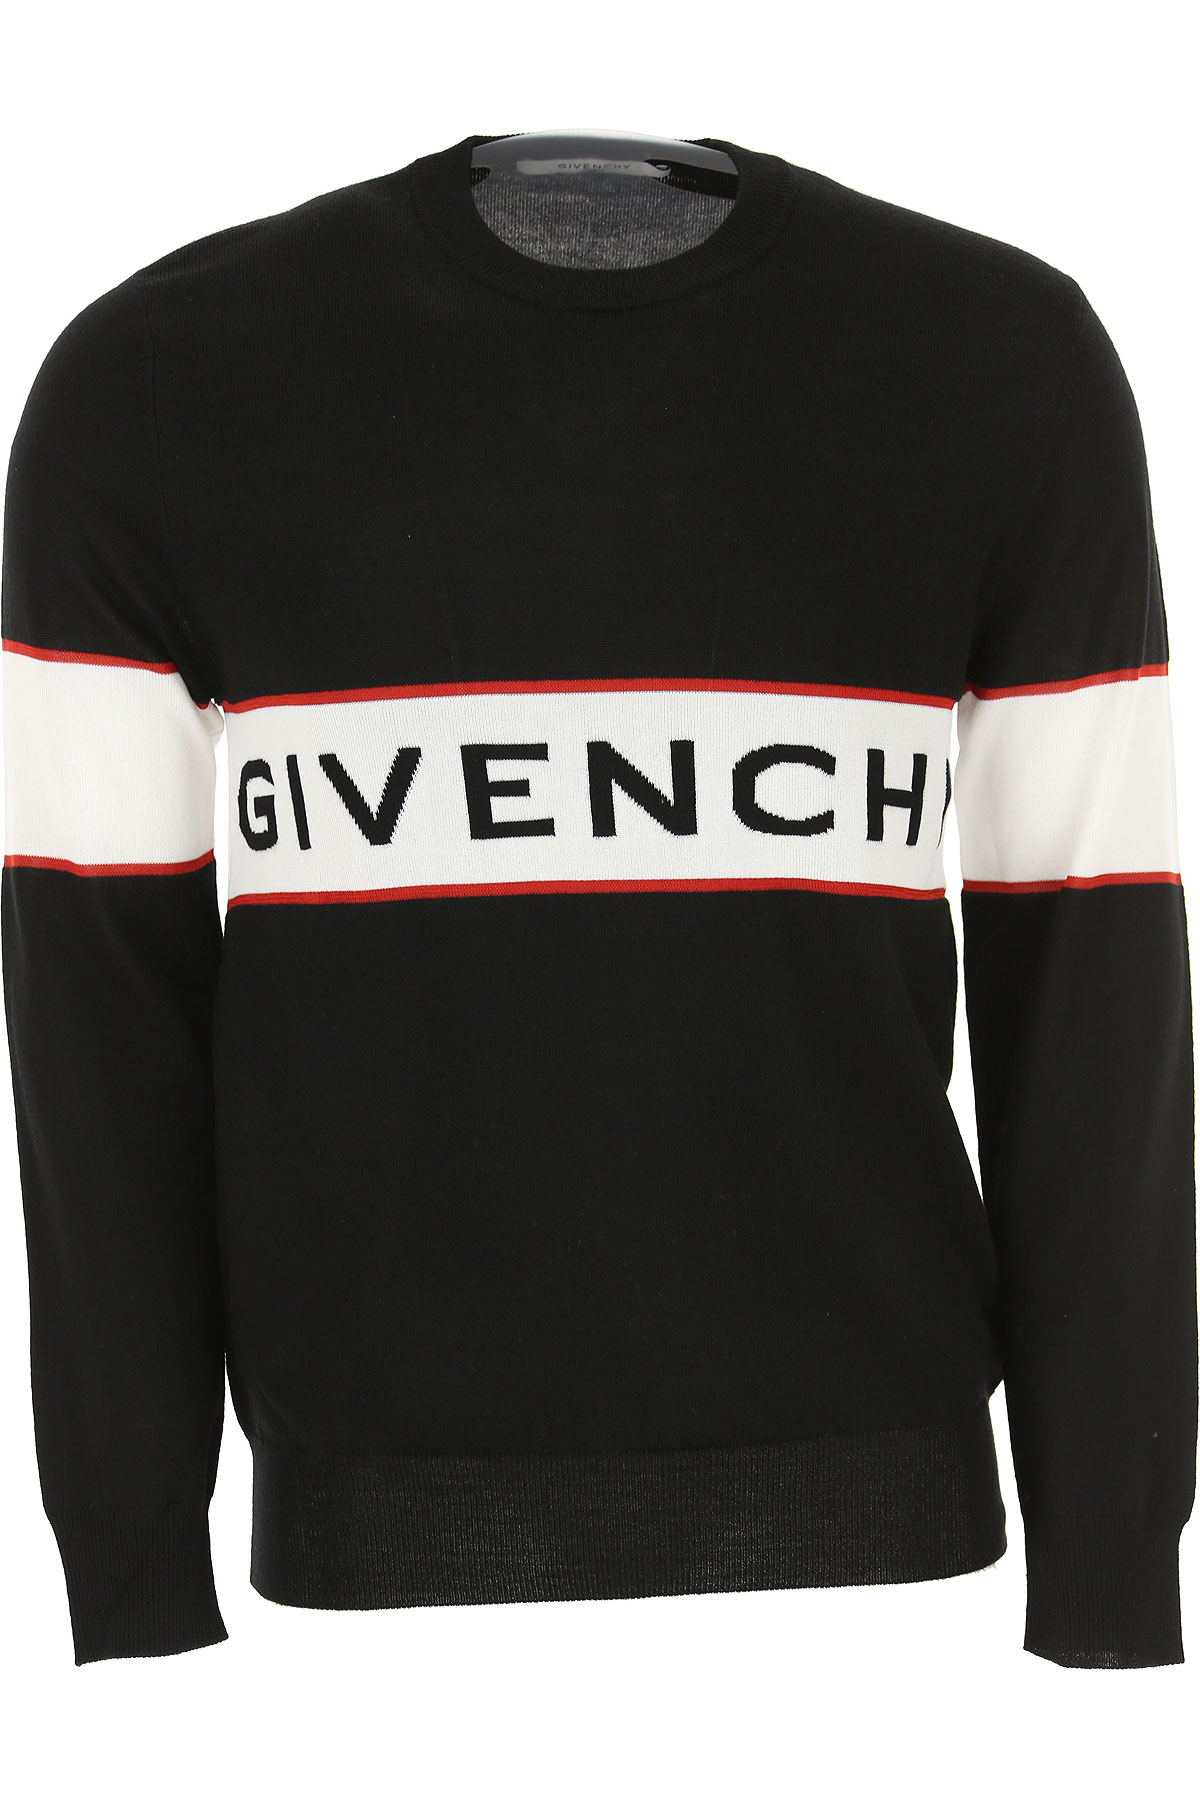 Mens Clothing Givenchy, Style code: bm904a4y11-004-